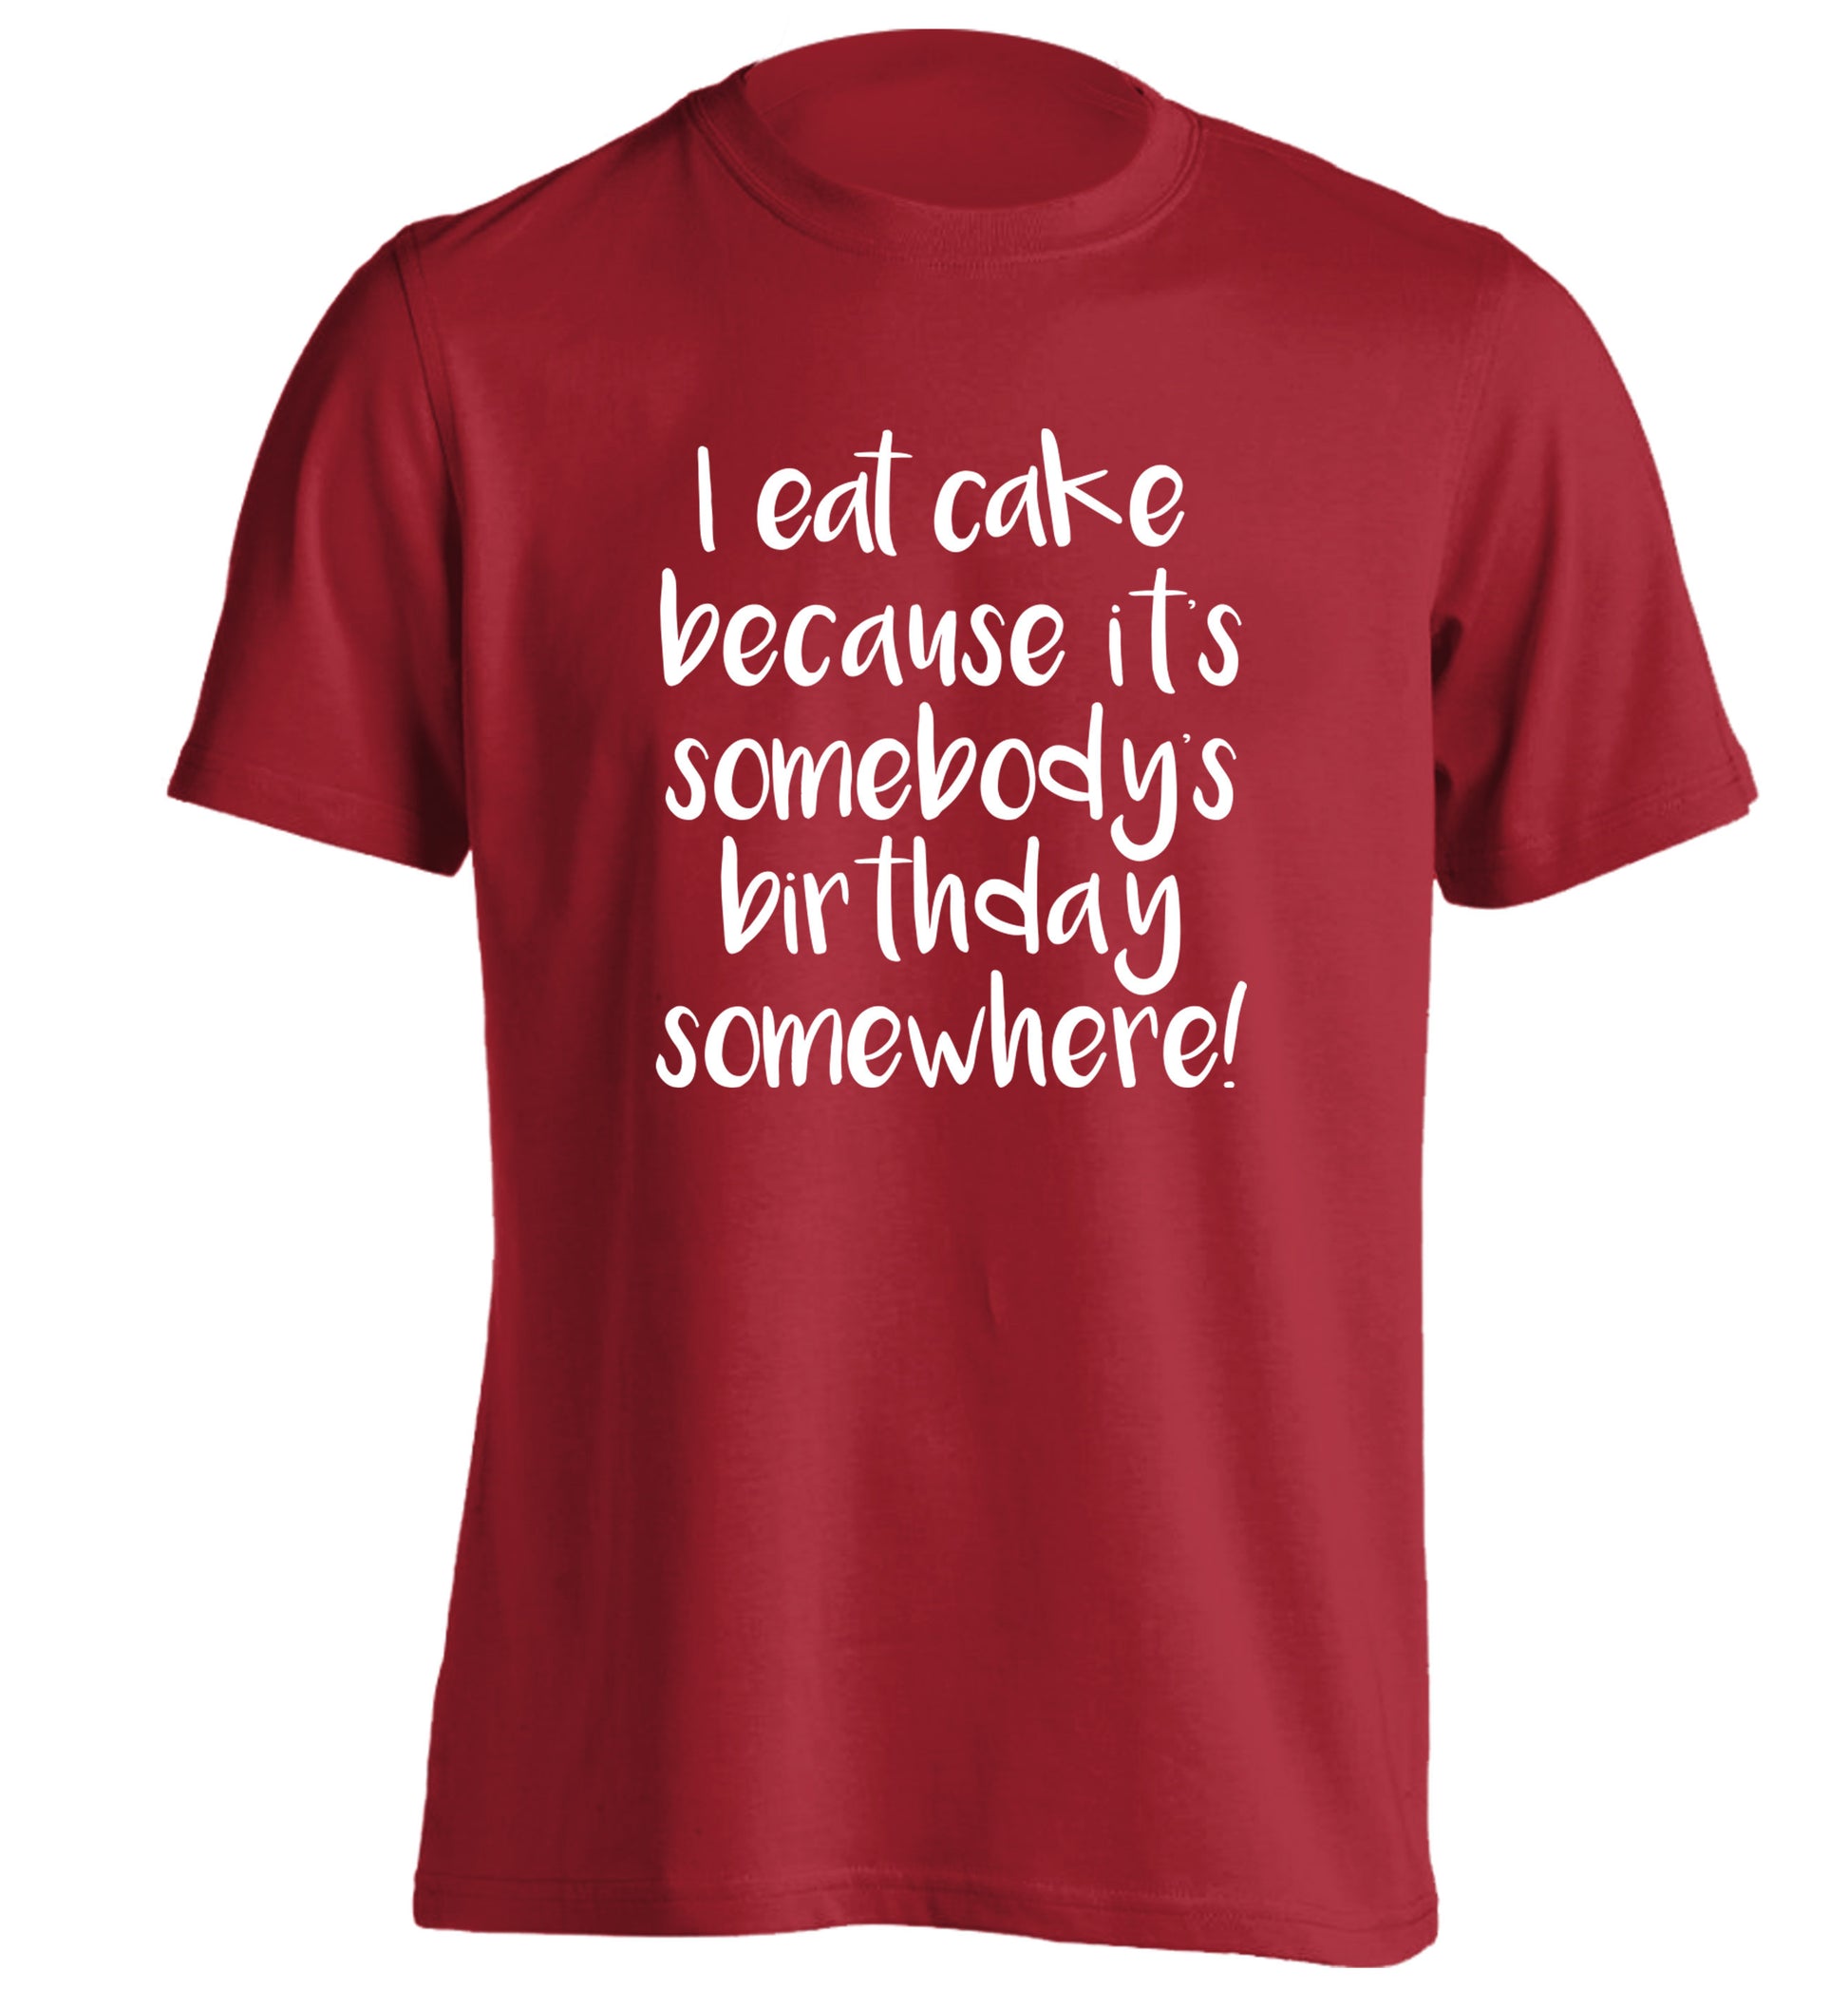 I eat cake because it's somebody's birthday somewhere! adults unisex red Tshirt 2XL